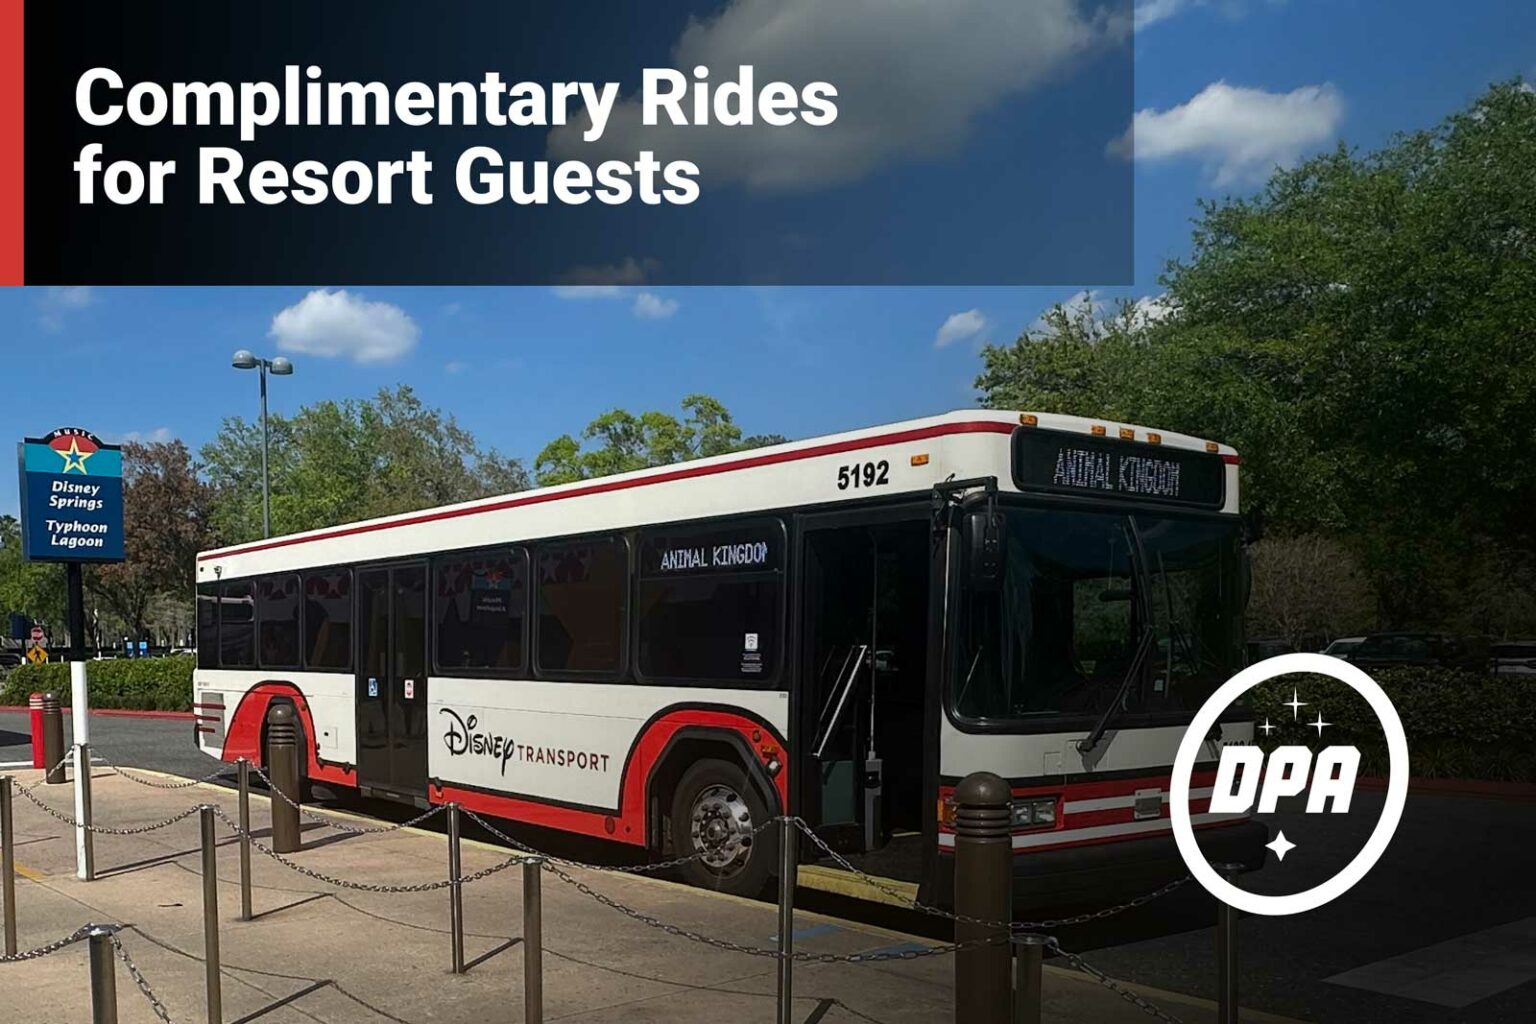 Complimentary Rides for Resort Guests